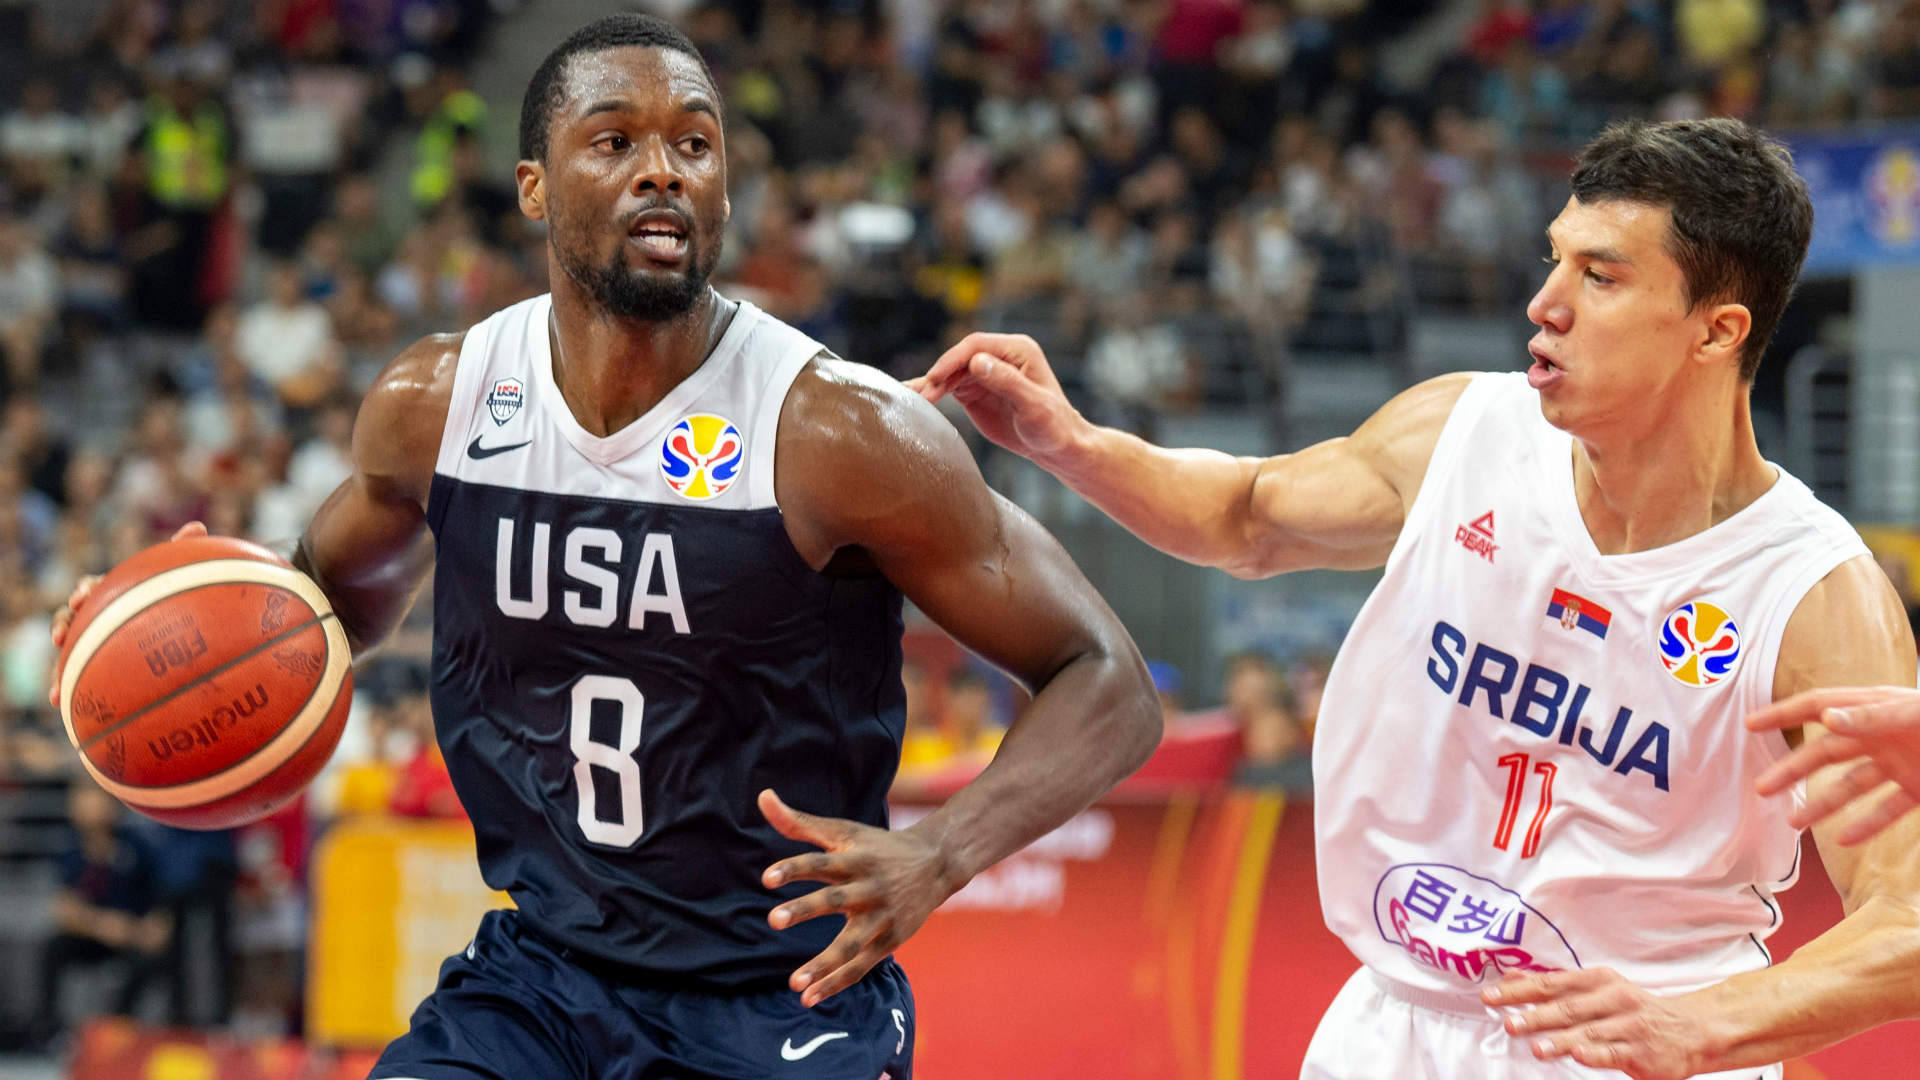 Team USA have lost back-to-back games with NBA players for the first time since 2002 after going down to Serbia on Thursday.